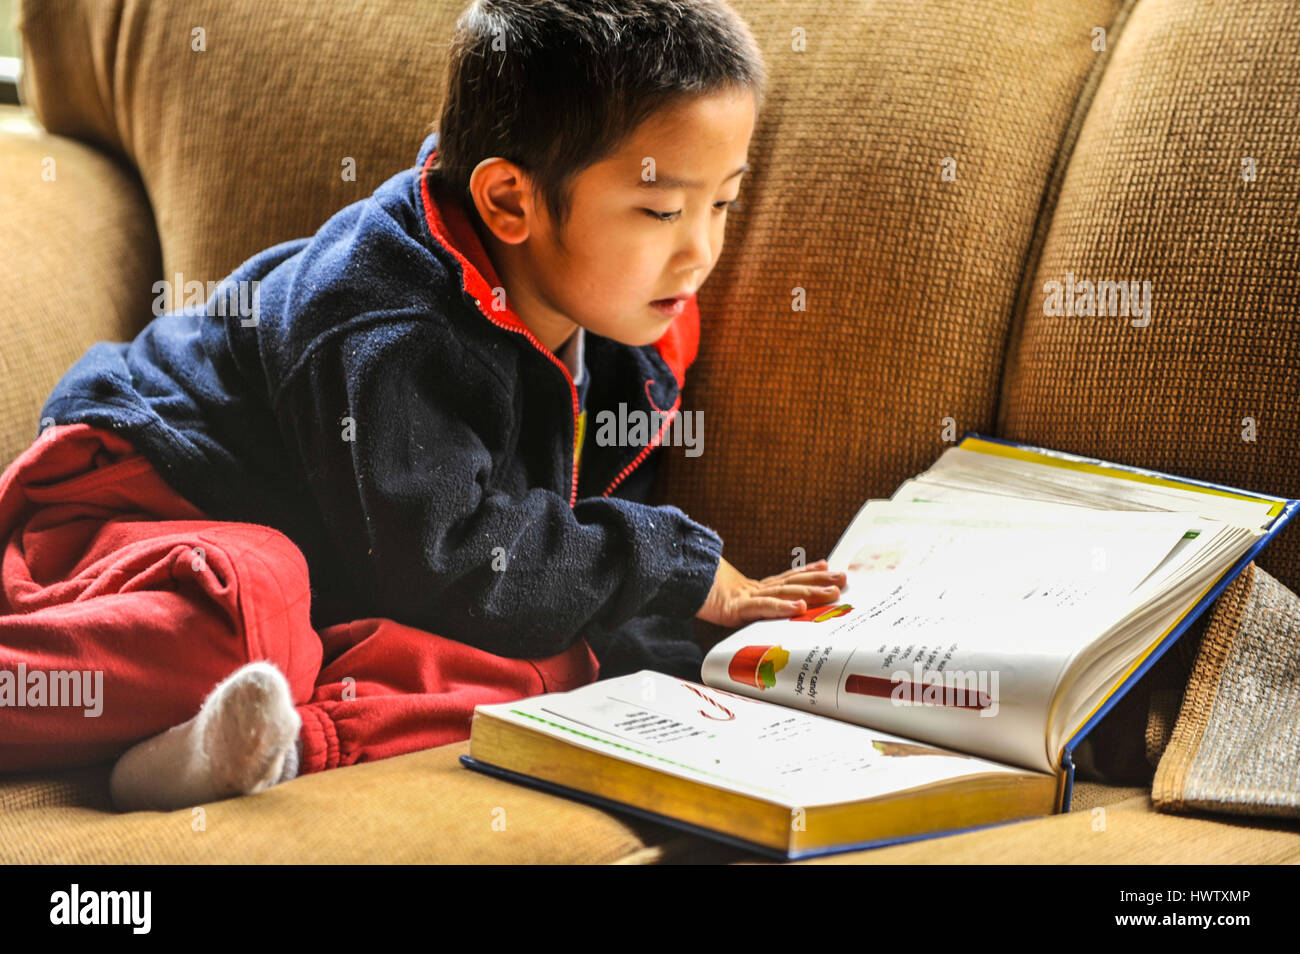 A young boy on a couch reading a big picture book.  Close up, natural light, horizontal, non-posing Stock Photo